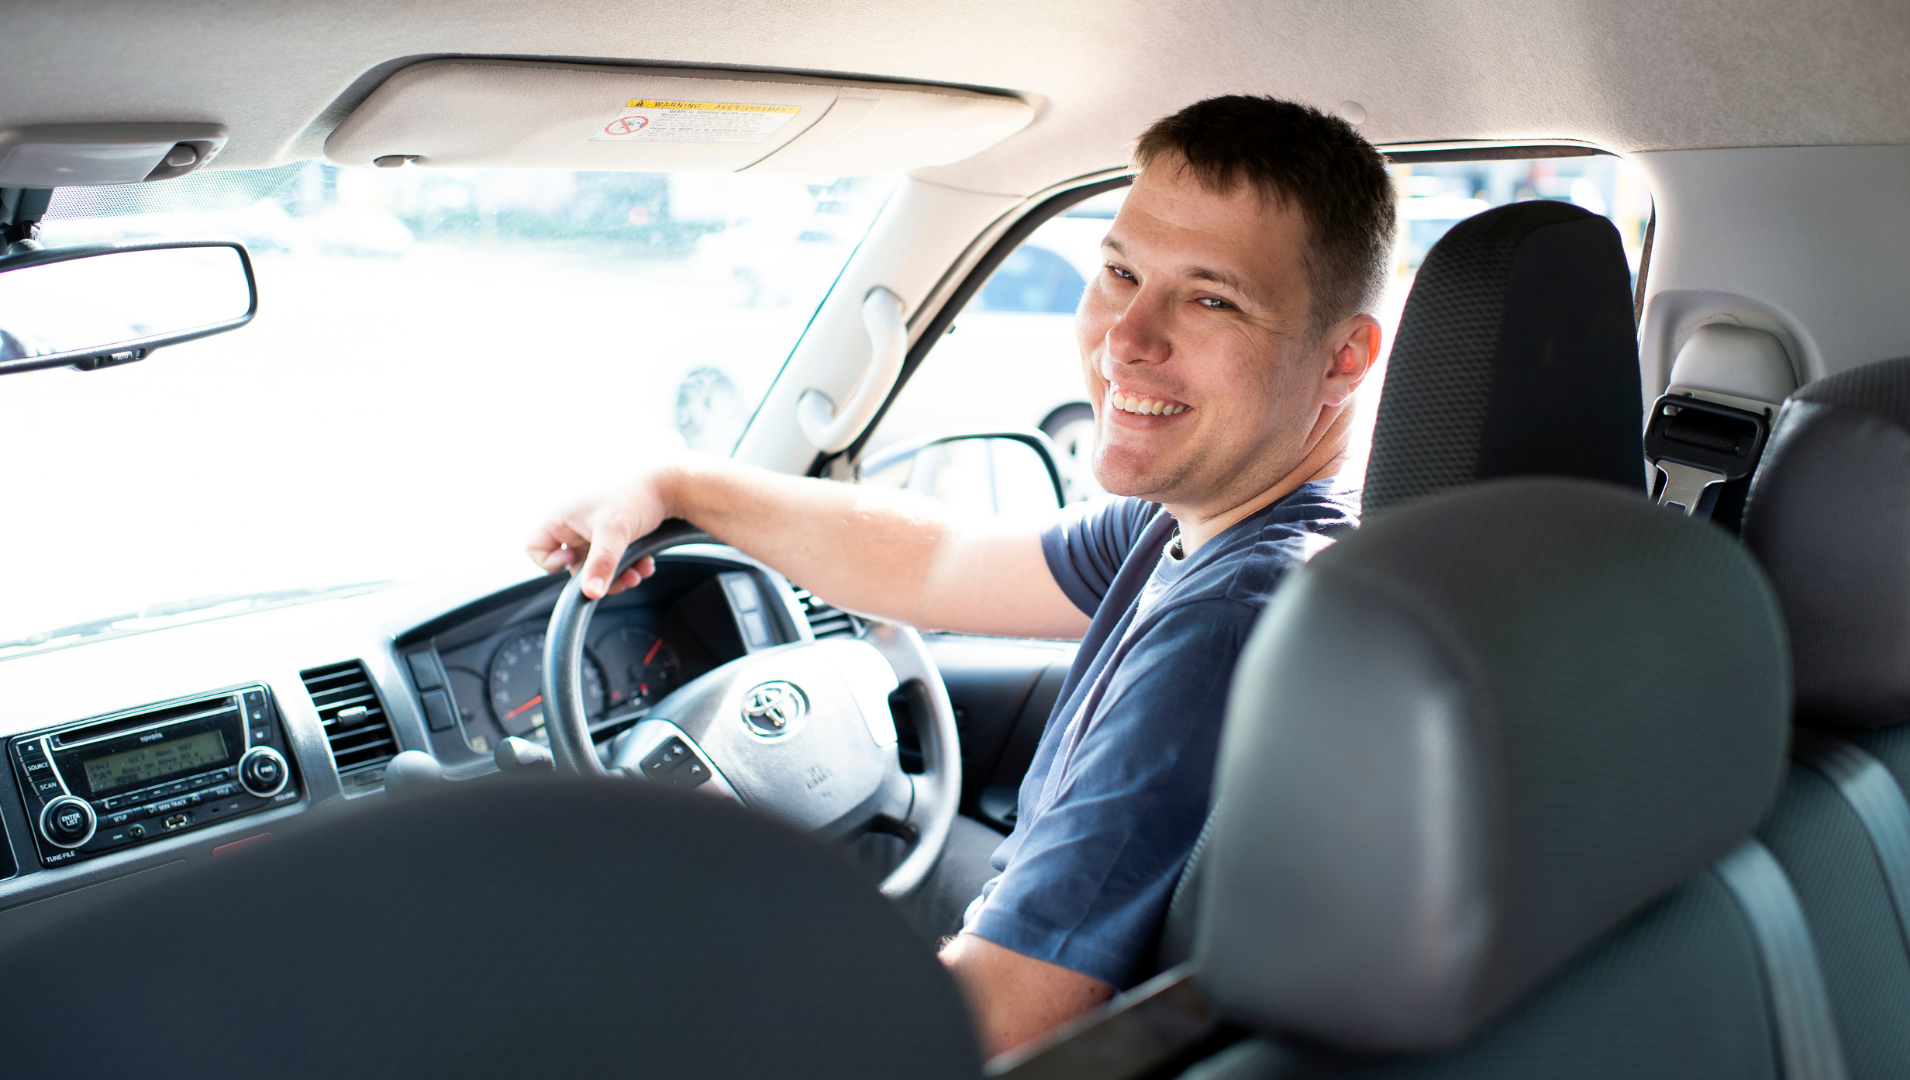 Alex pictured smiling in the front seat of a work car